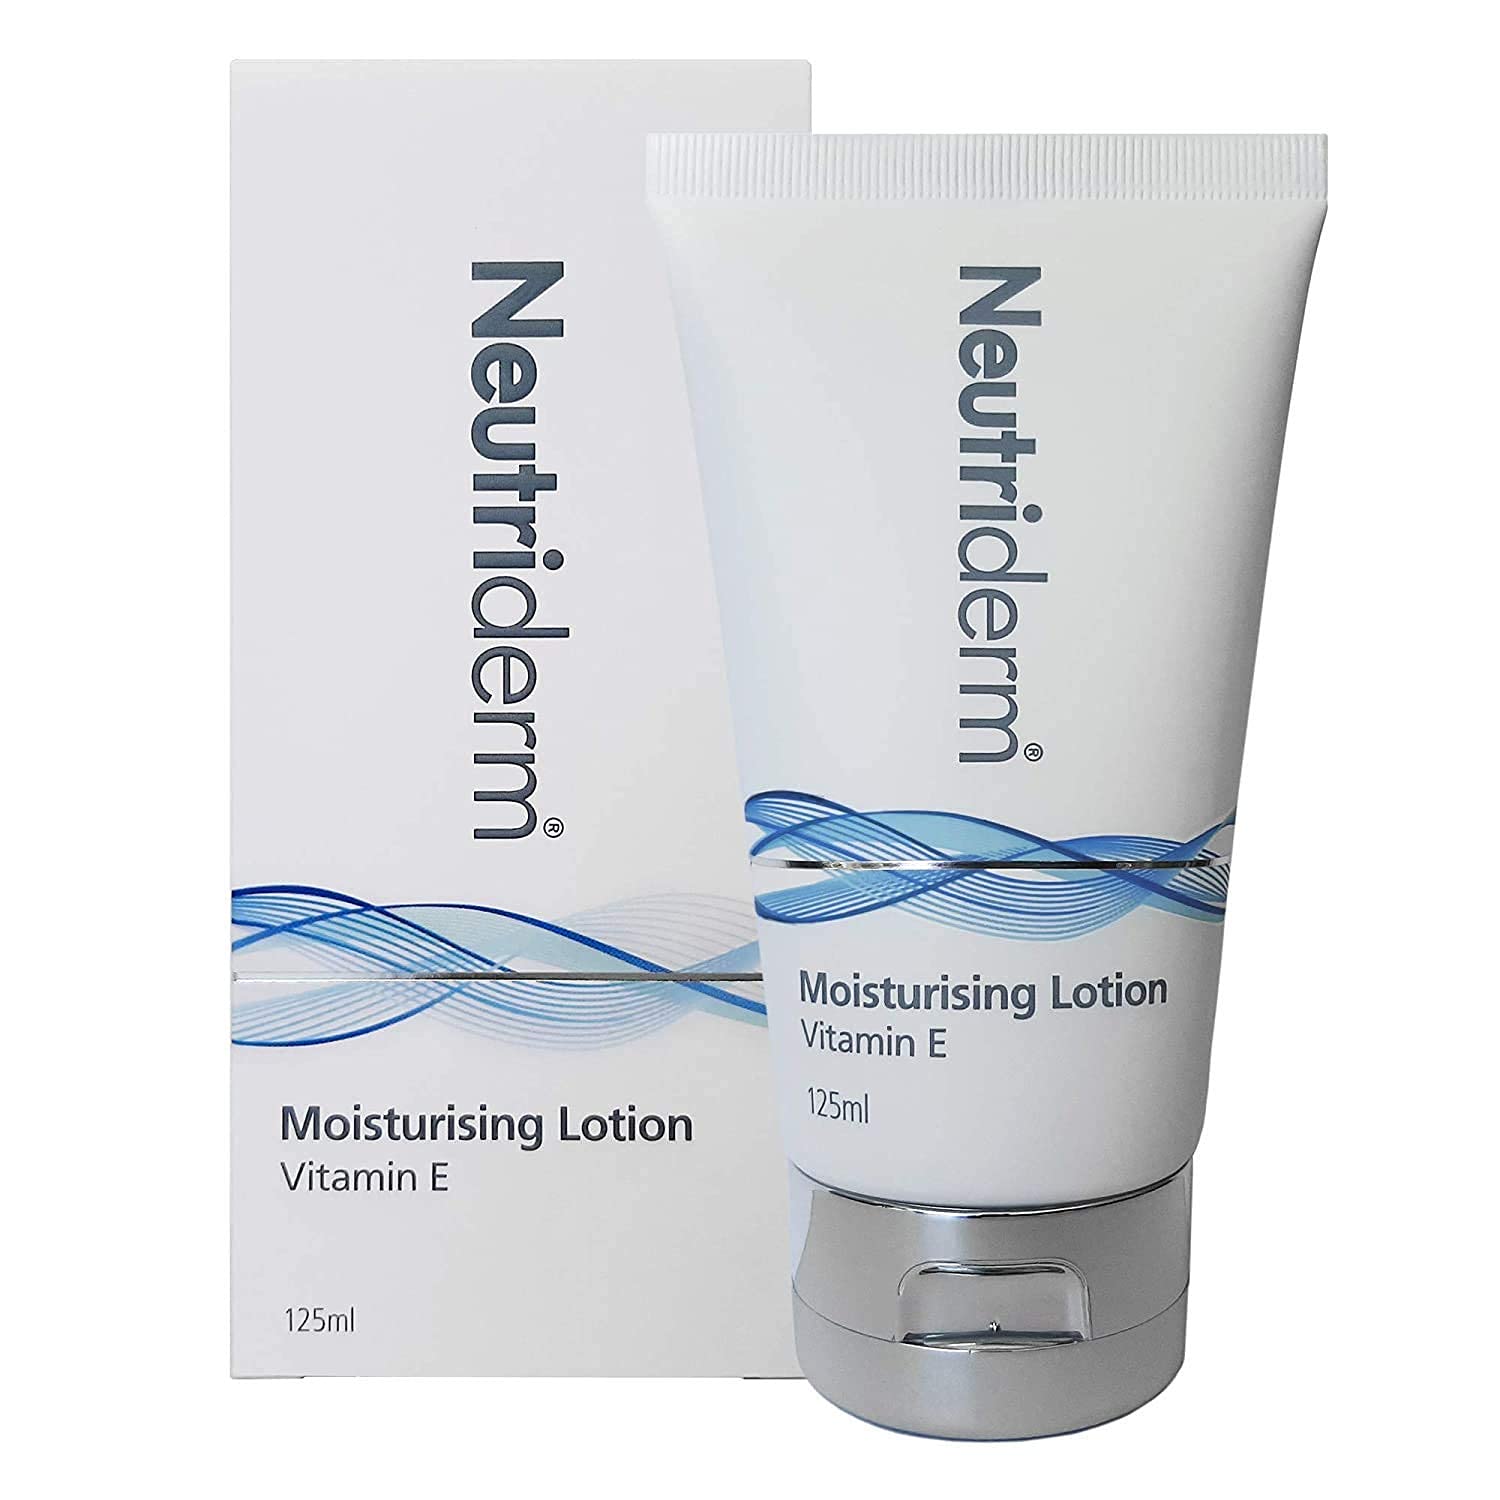 NEUTRIDERM Moisturising Lotion - Deep Hydration for All Skin Types with Vitamin E | Long-Lasting Body Lotion and Facial Moisturizer, 125ml, 2 Pack